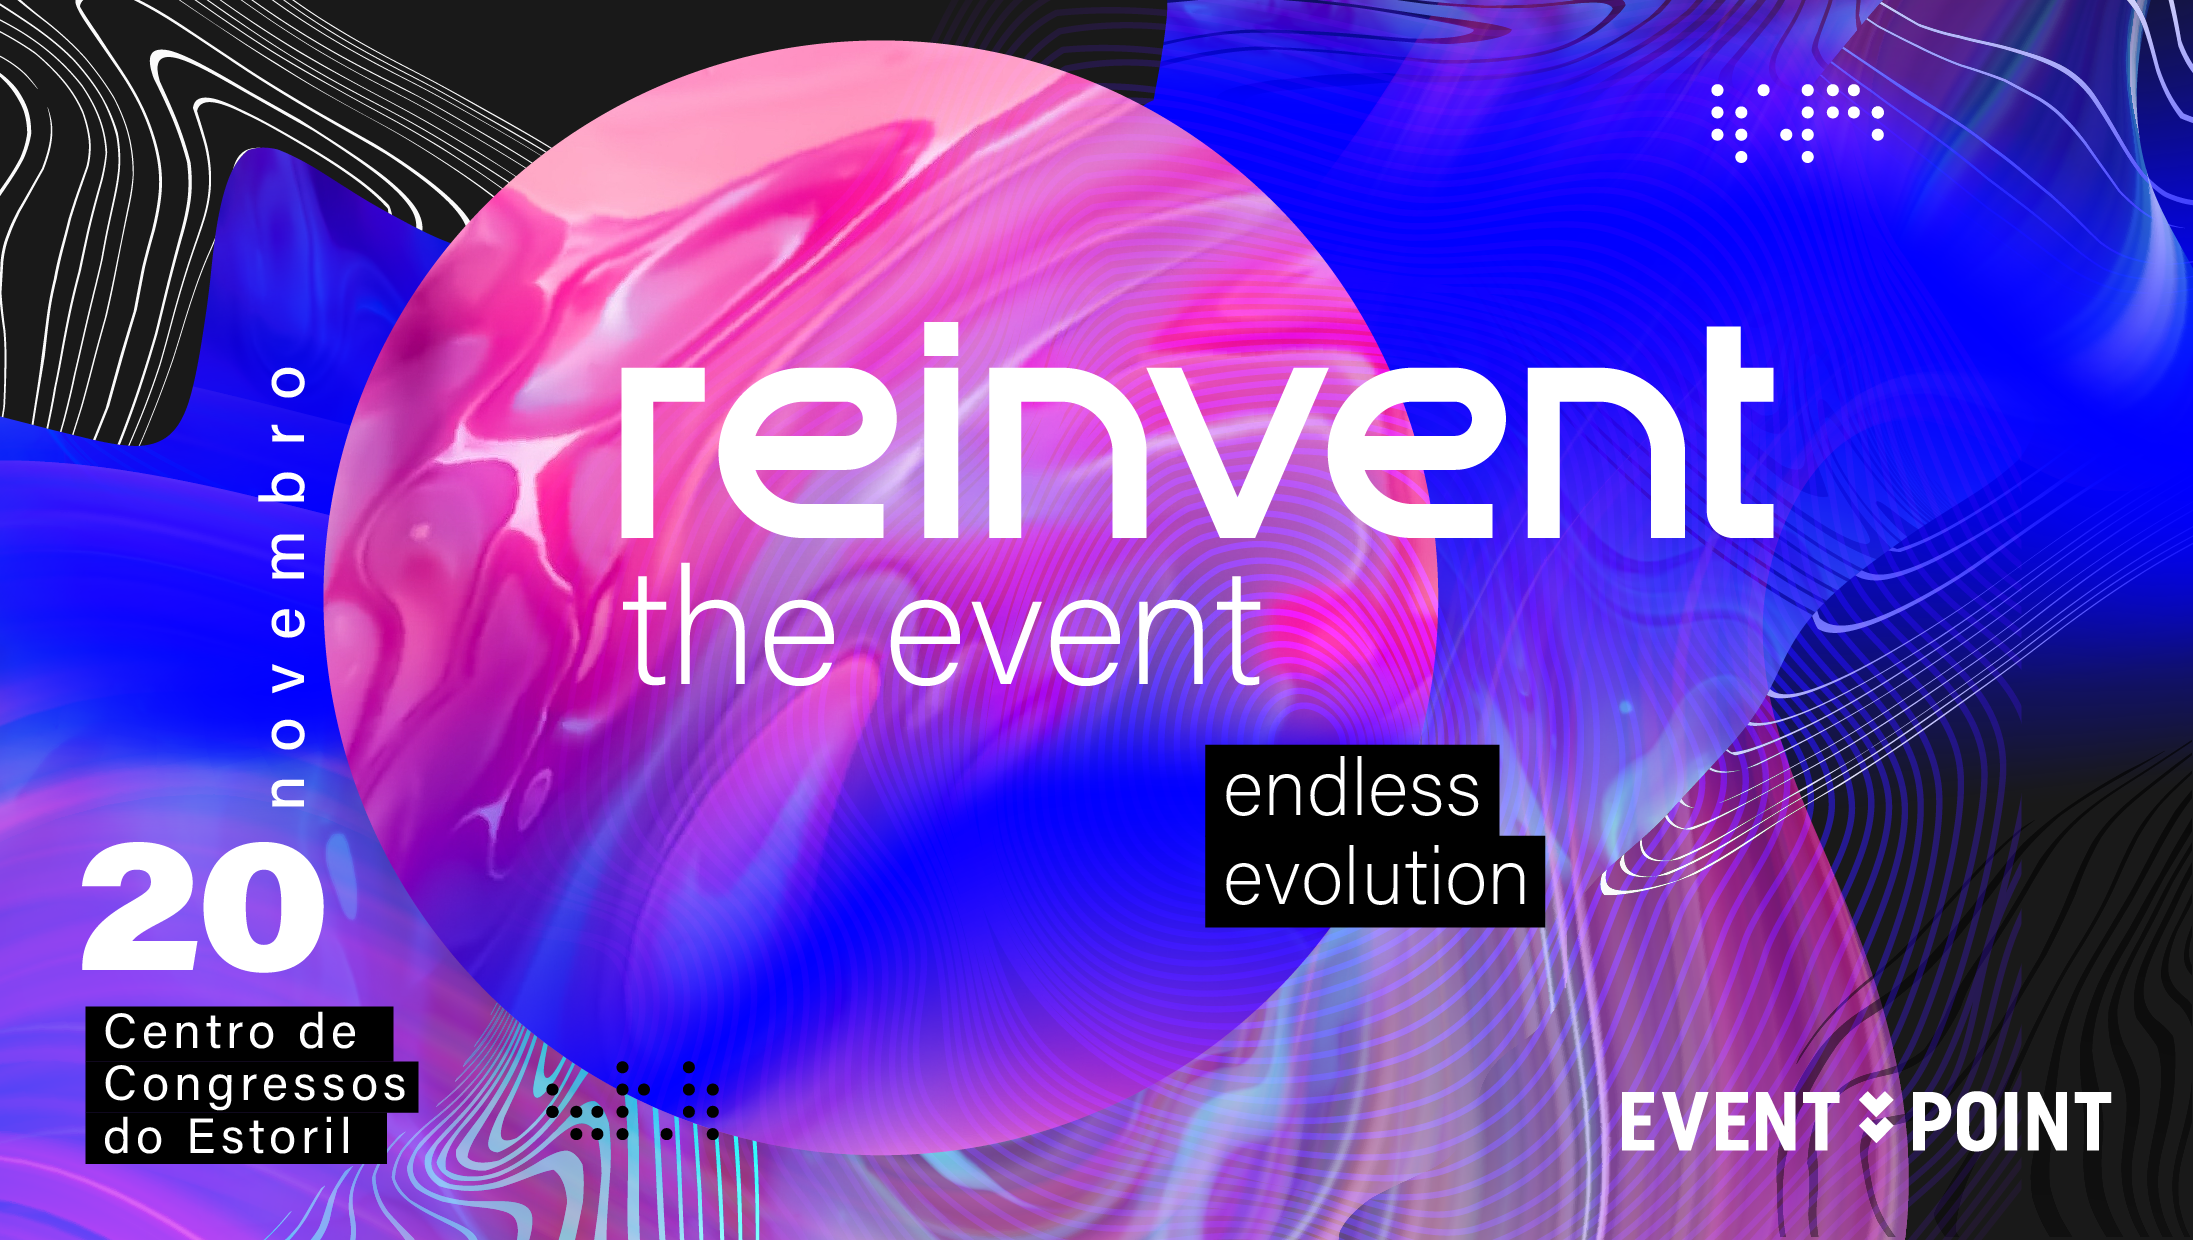 Reinvent the event